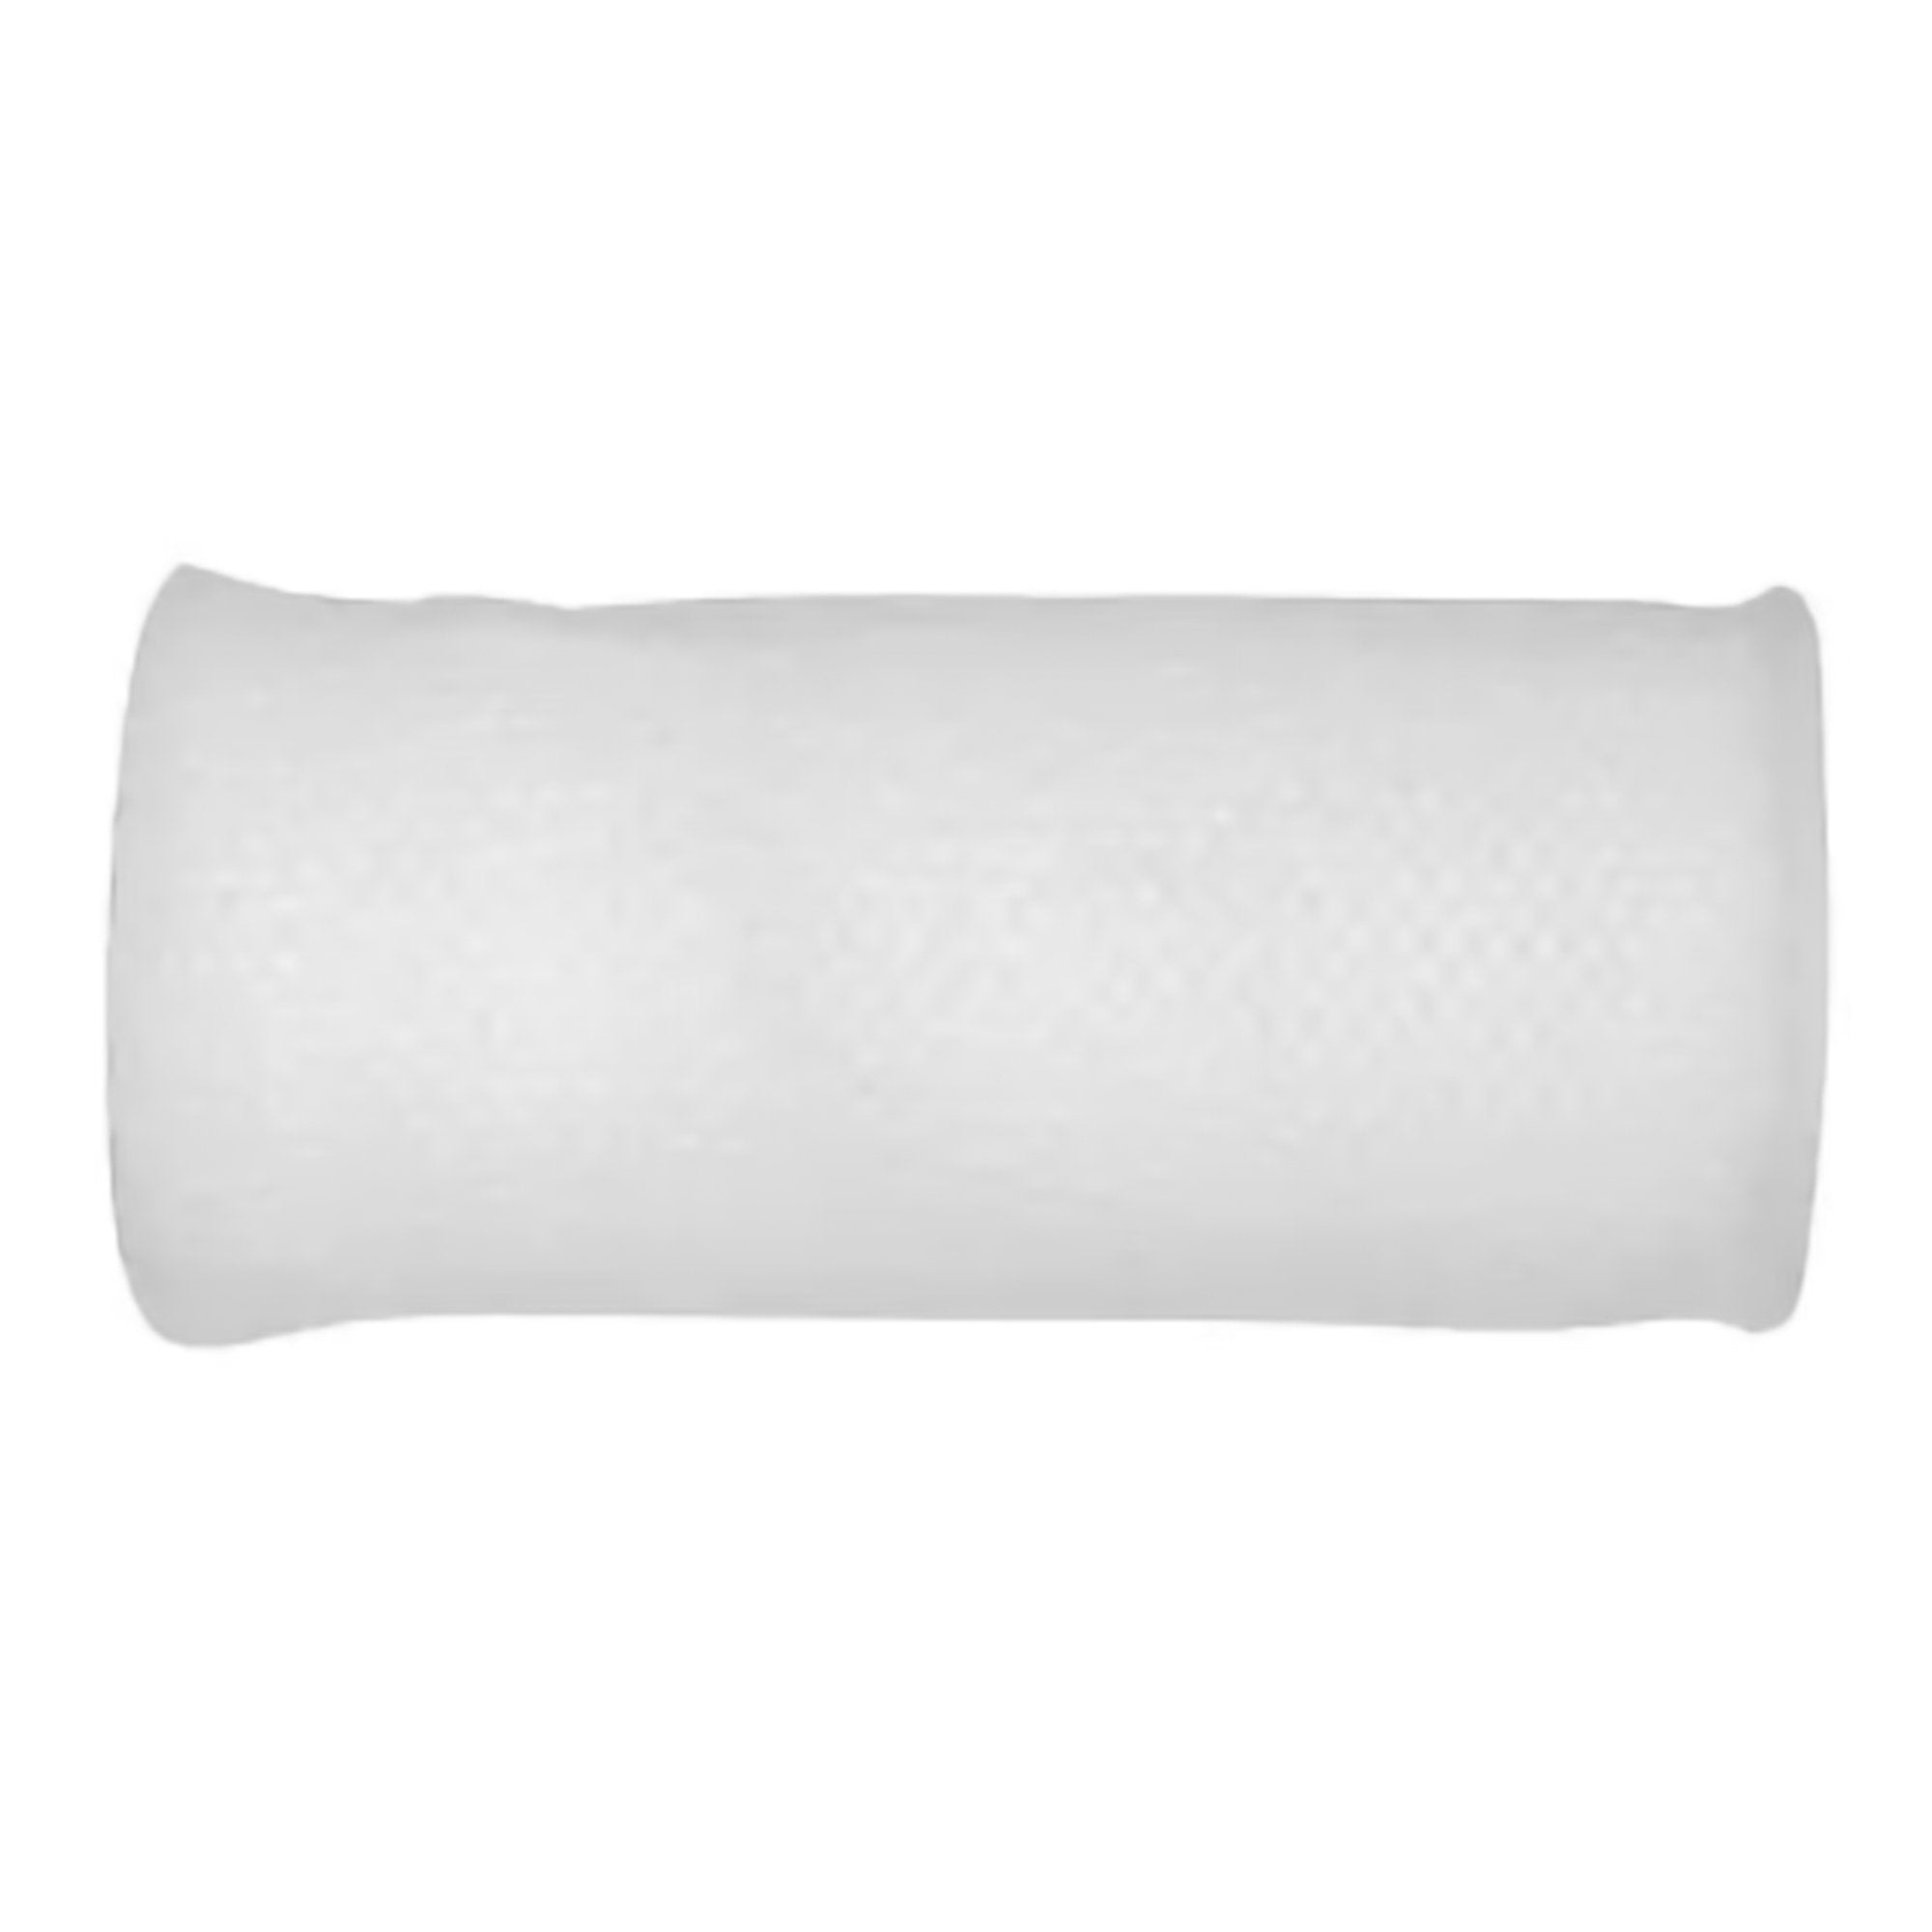 Conforming Bandage Dynarex Polyester 1-Ply 3 Inch X 4-1/10 Yard Roll Shape NonSterile